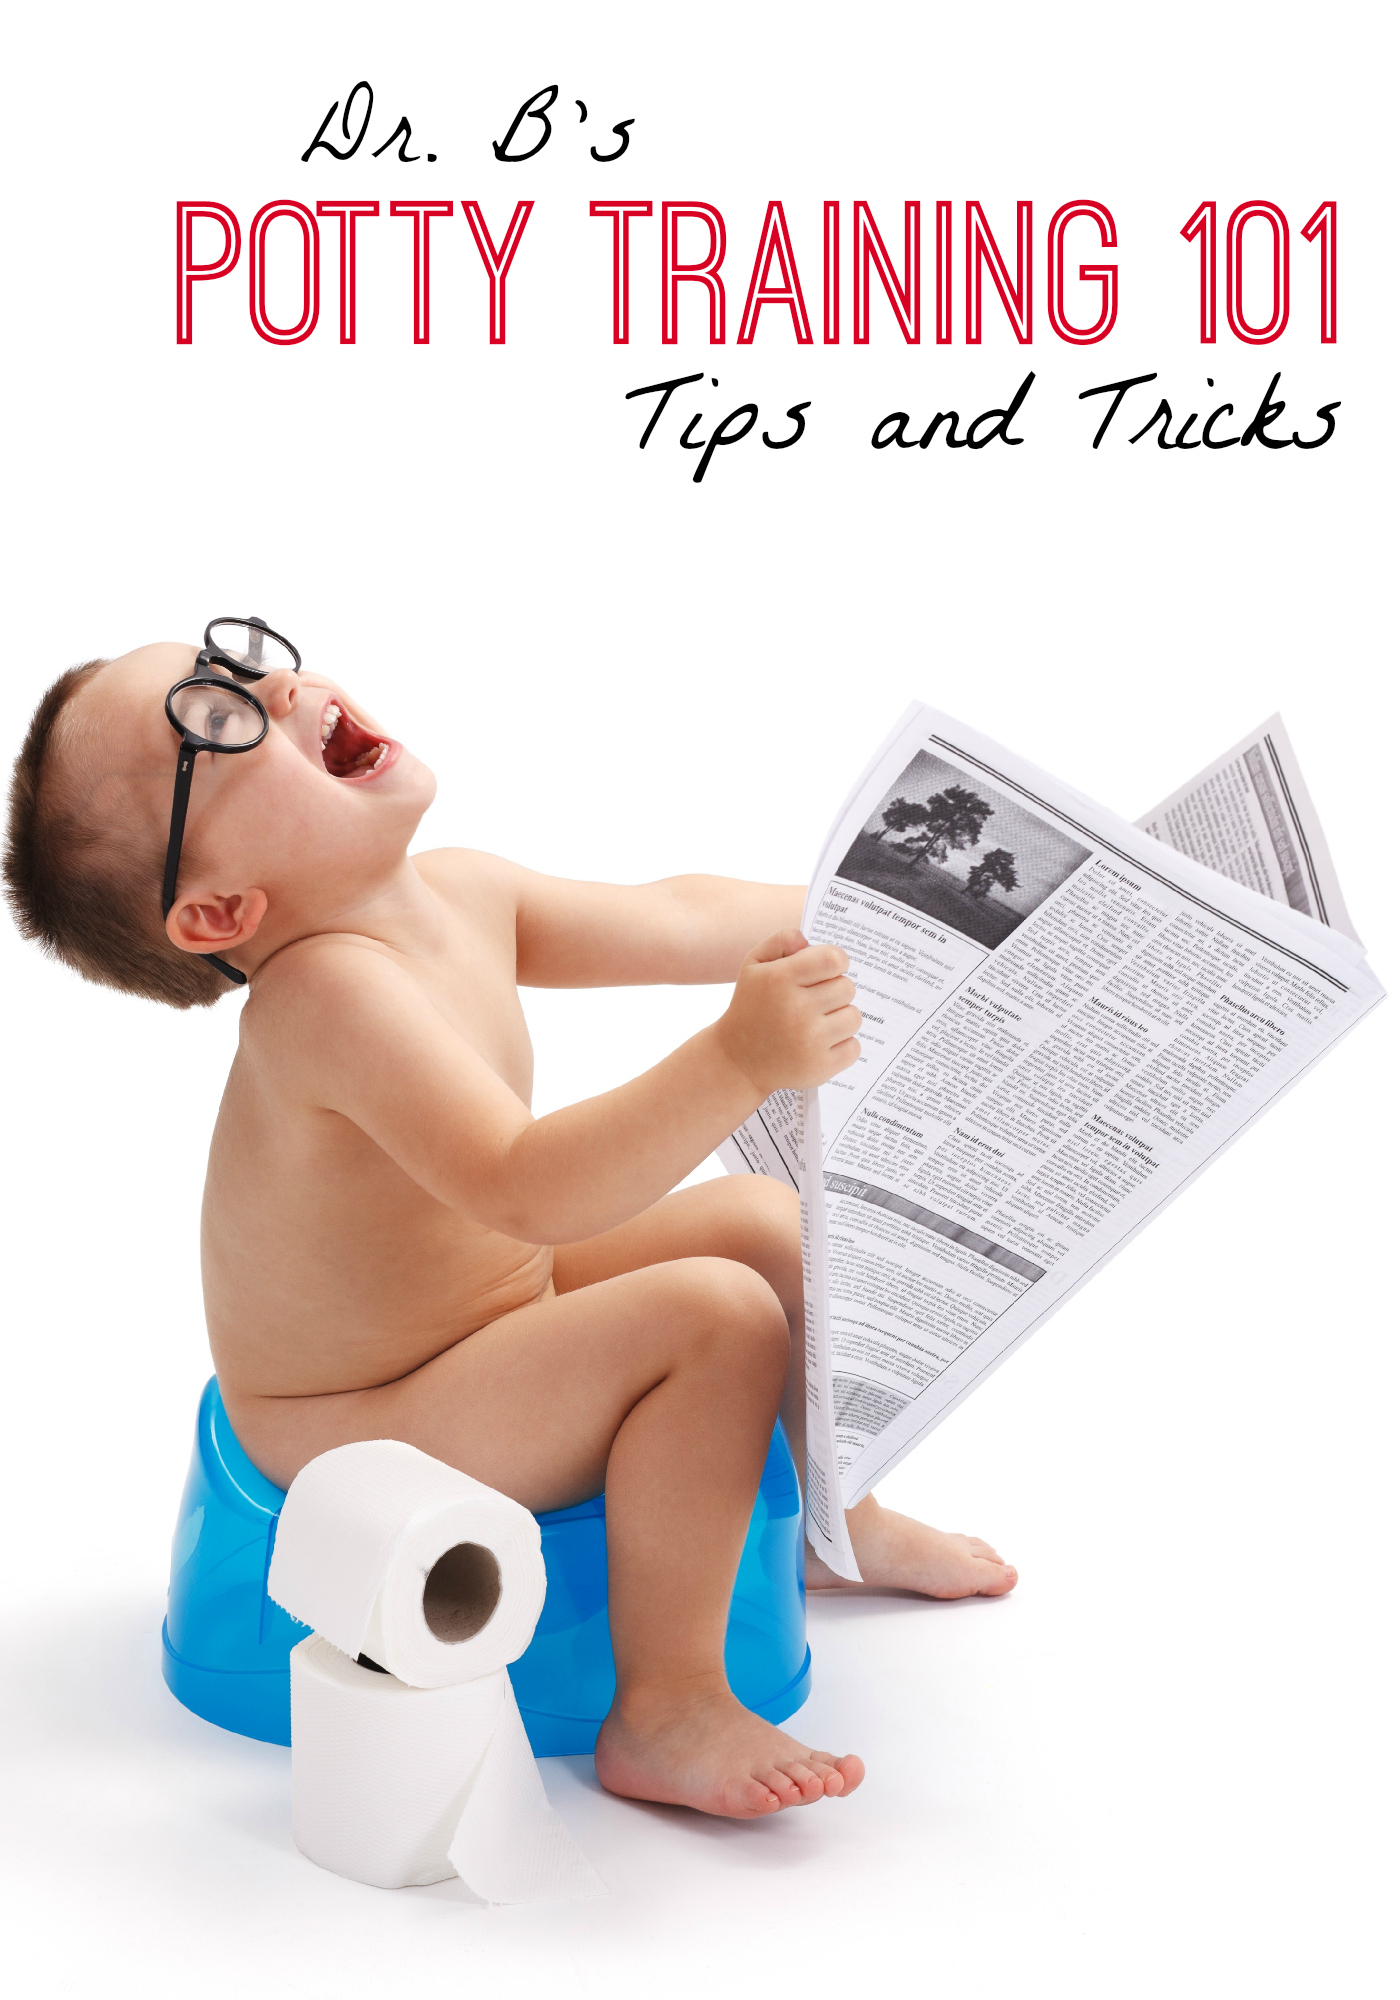 Potty Training: When to start, what you need, how to do it, and setting your child up for as few disasters as possible